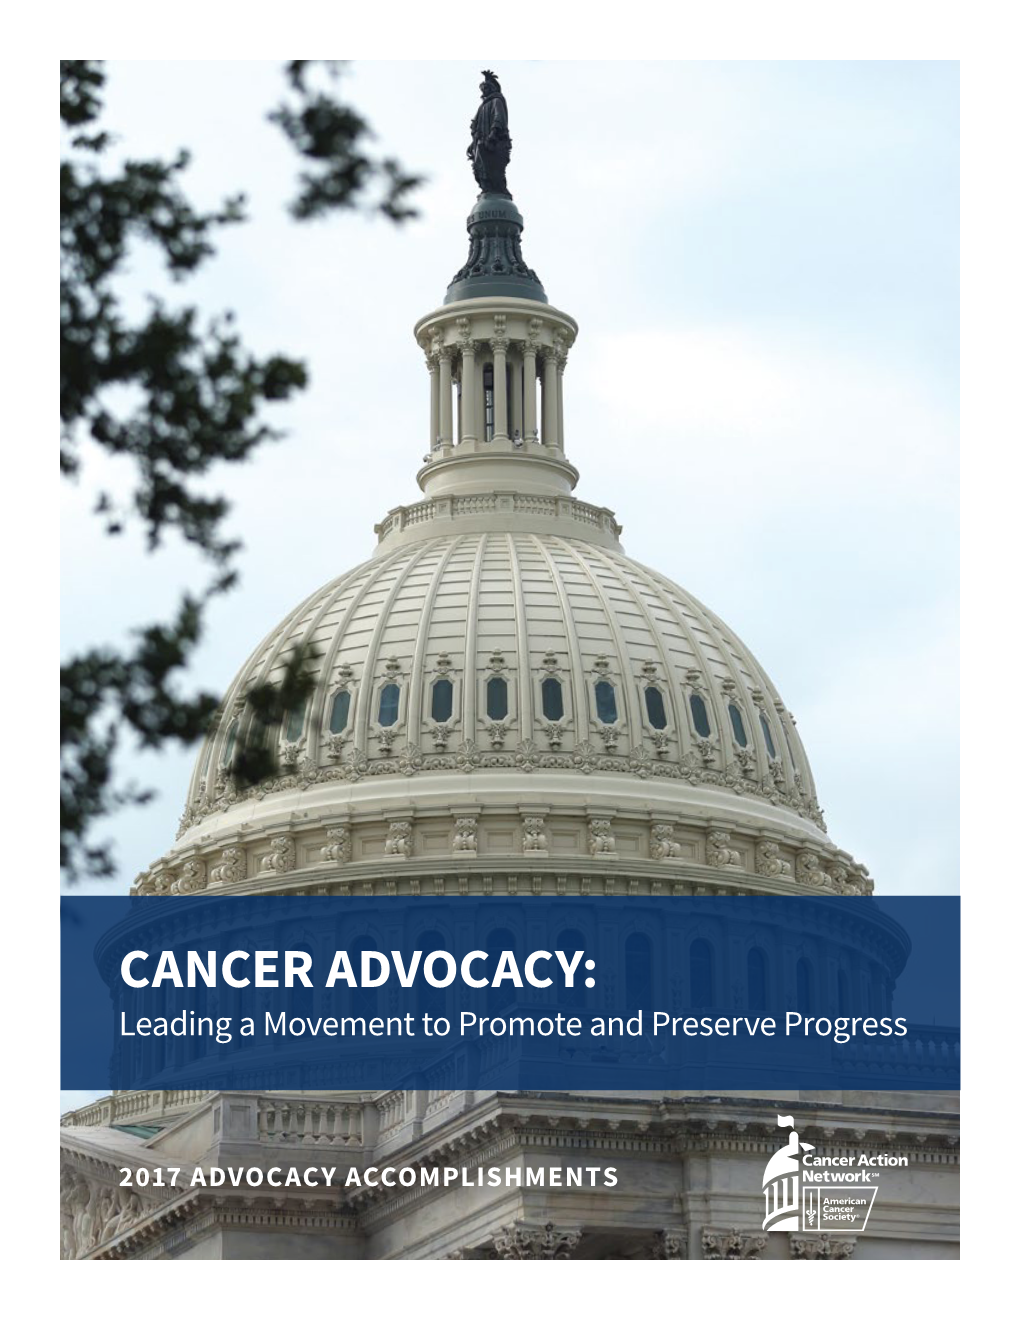 American Cancer Society Cancer Action Network 2017 Advocacy Accomplishments